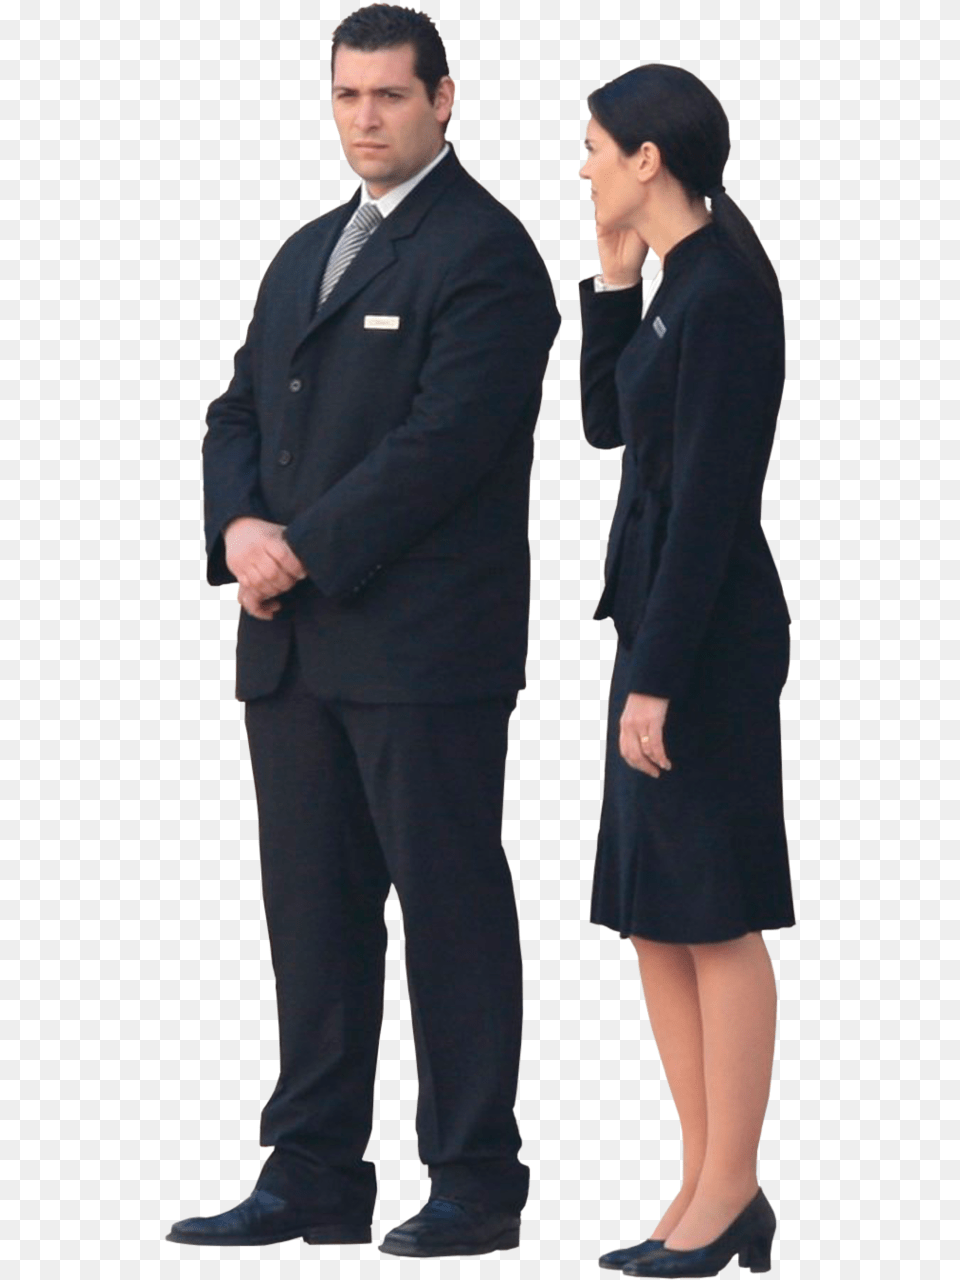 Business People Photos Business People, Tuxedo, Suit, Jacket, Formal Wear Free Png